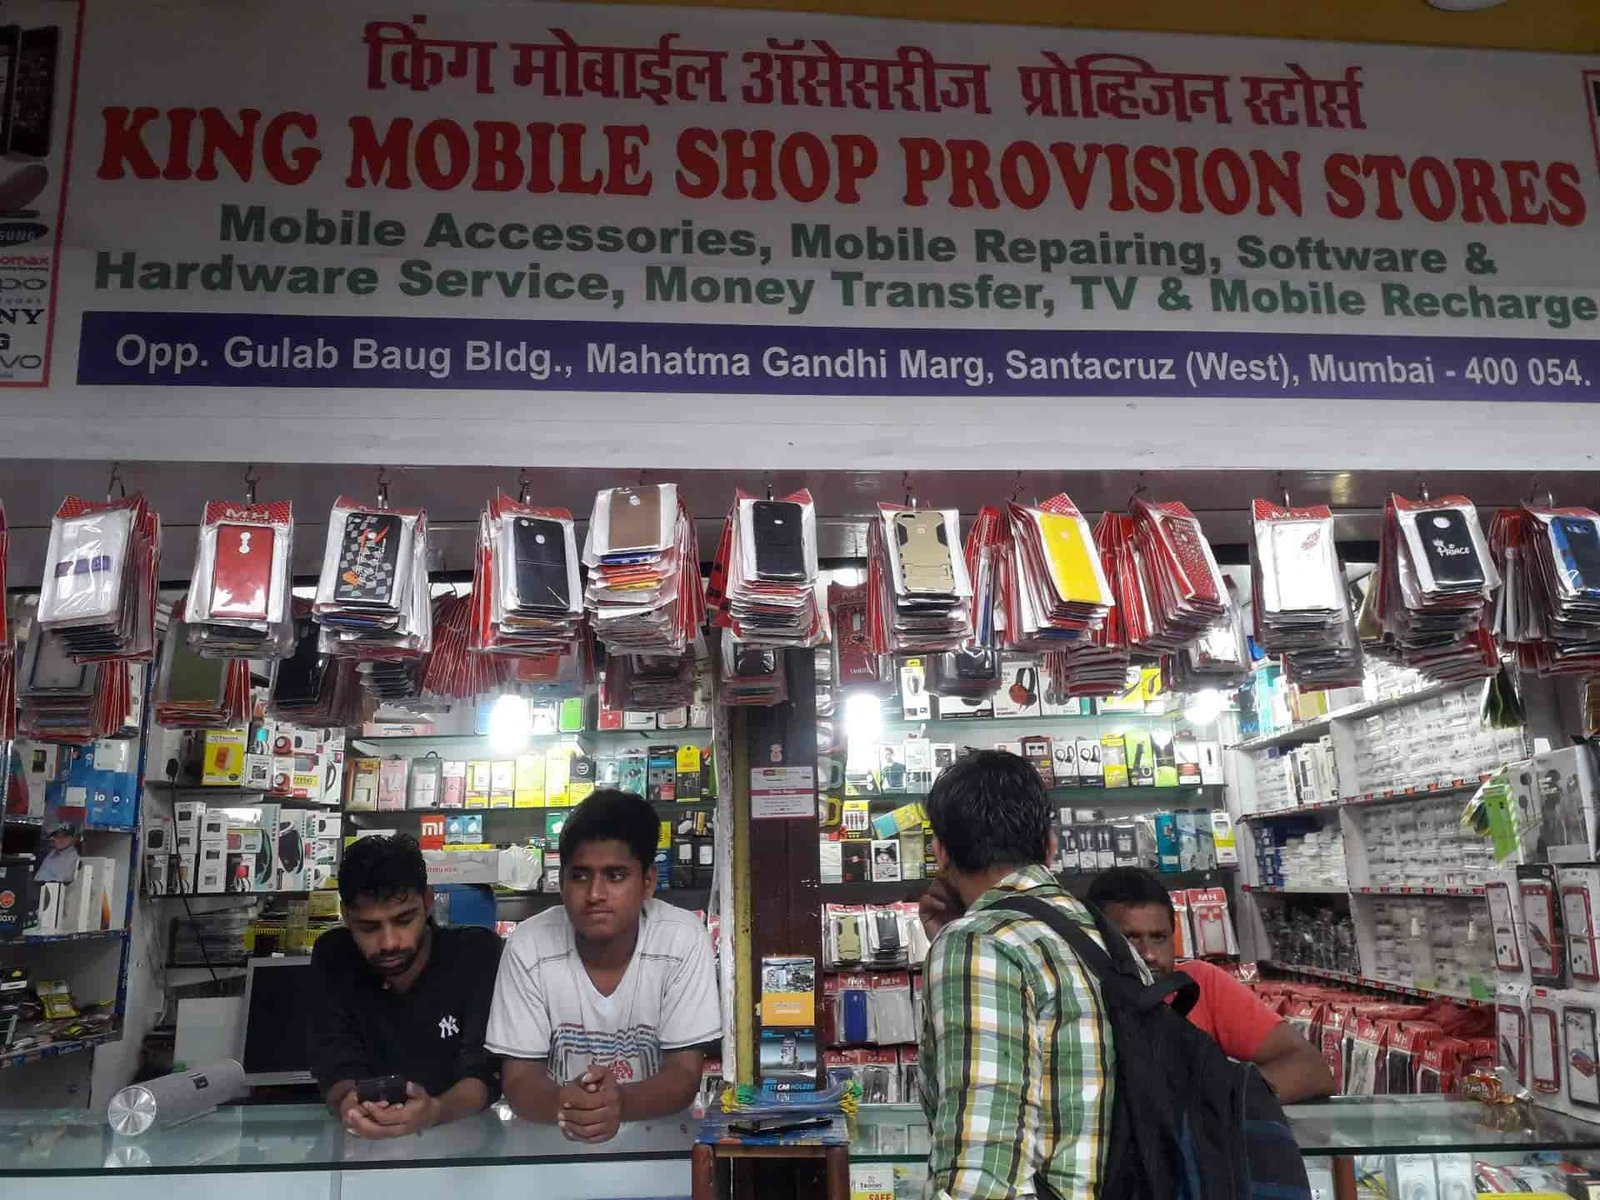 King Mobile Shop Provision Stores